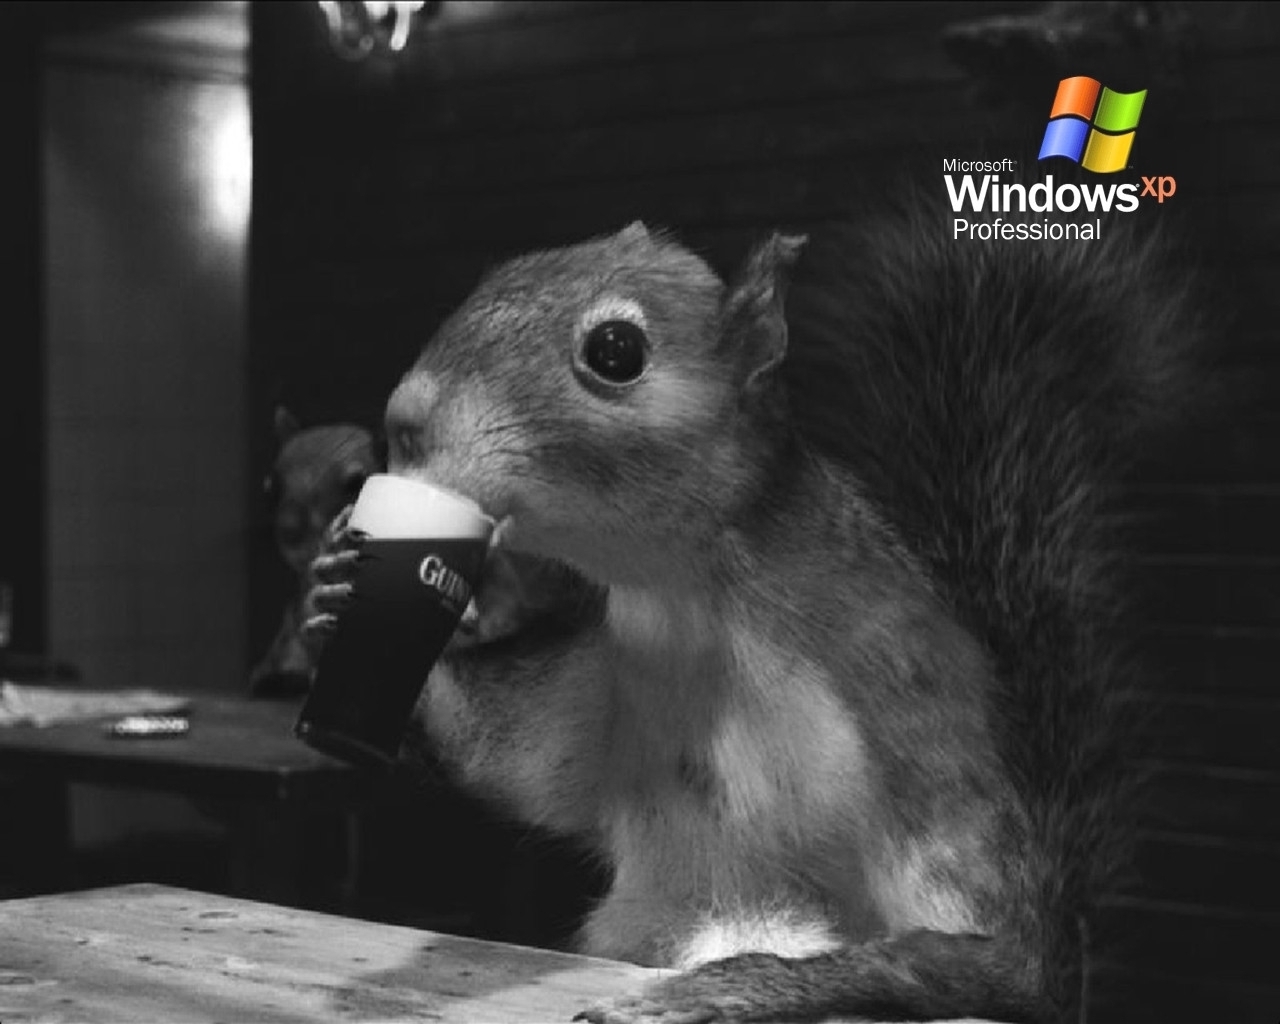 beer, funny, animals, squirrel, rodents, gray